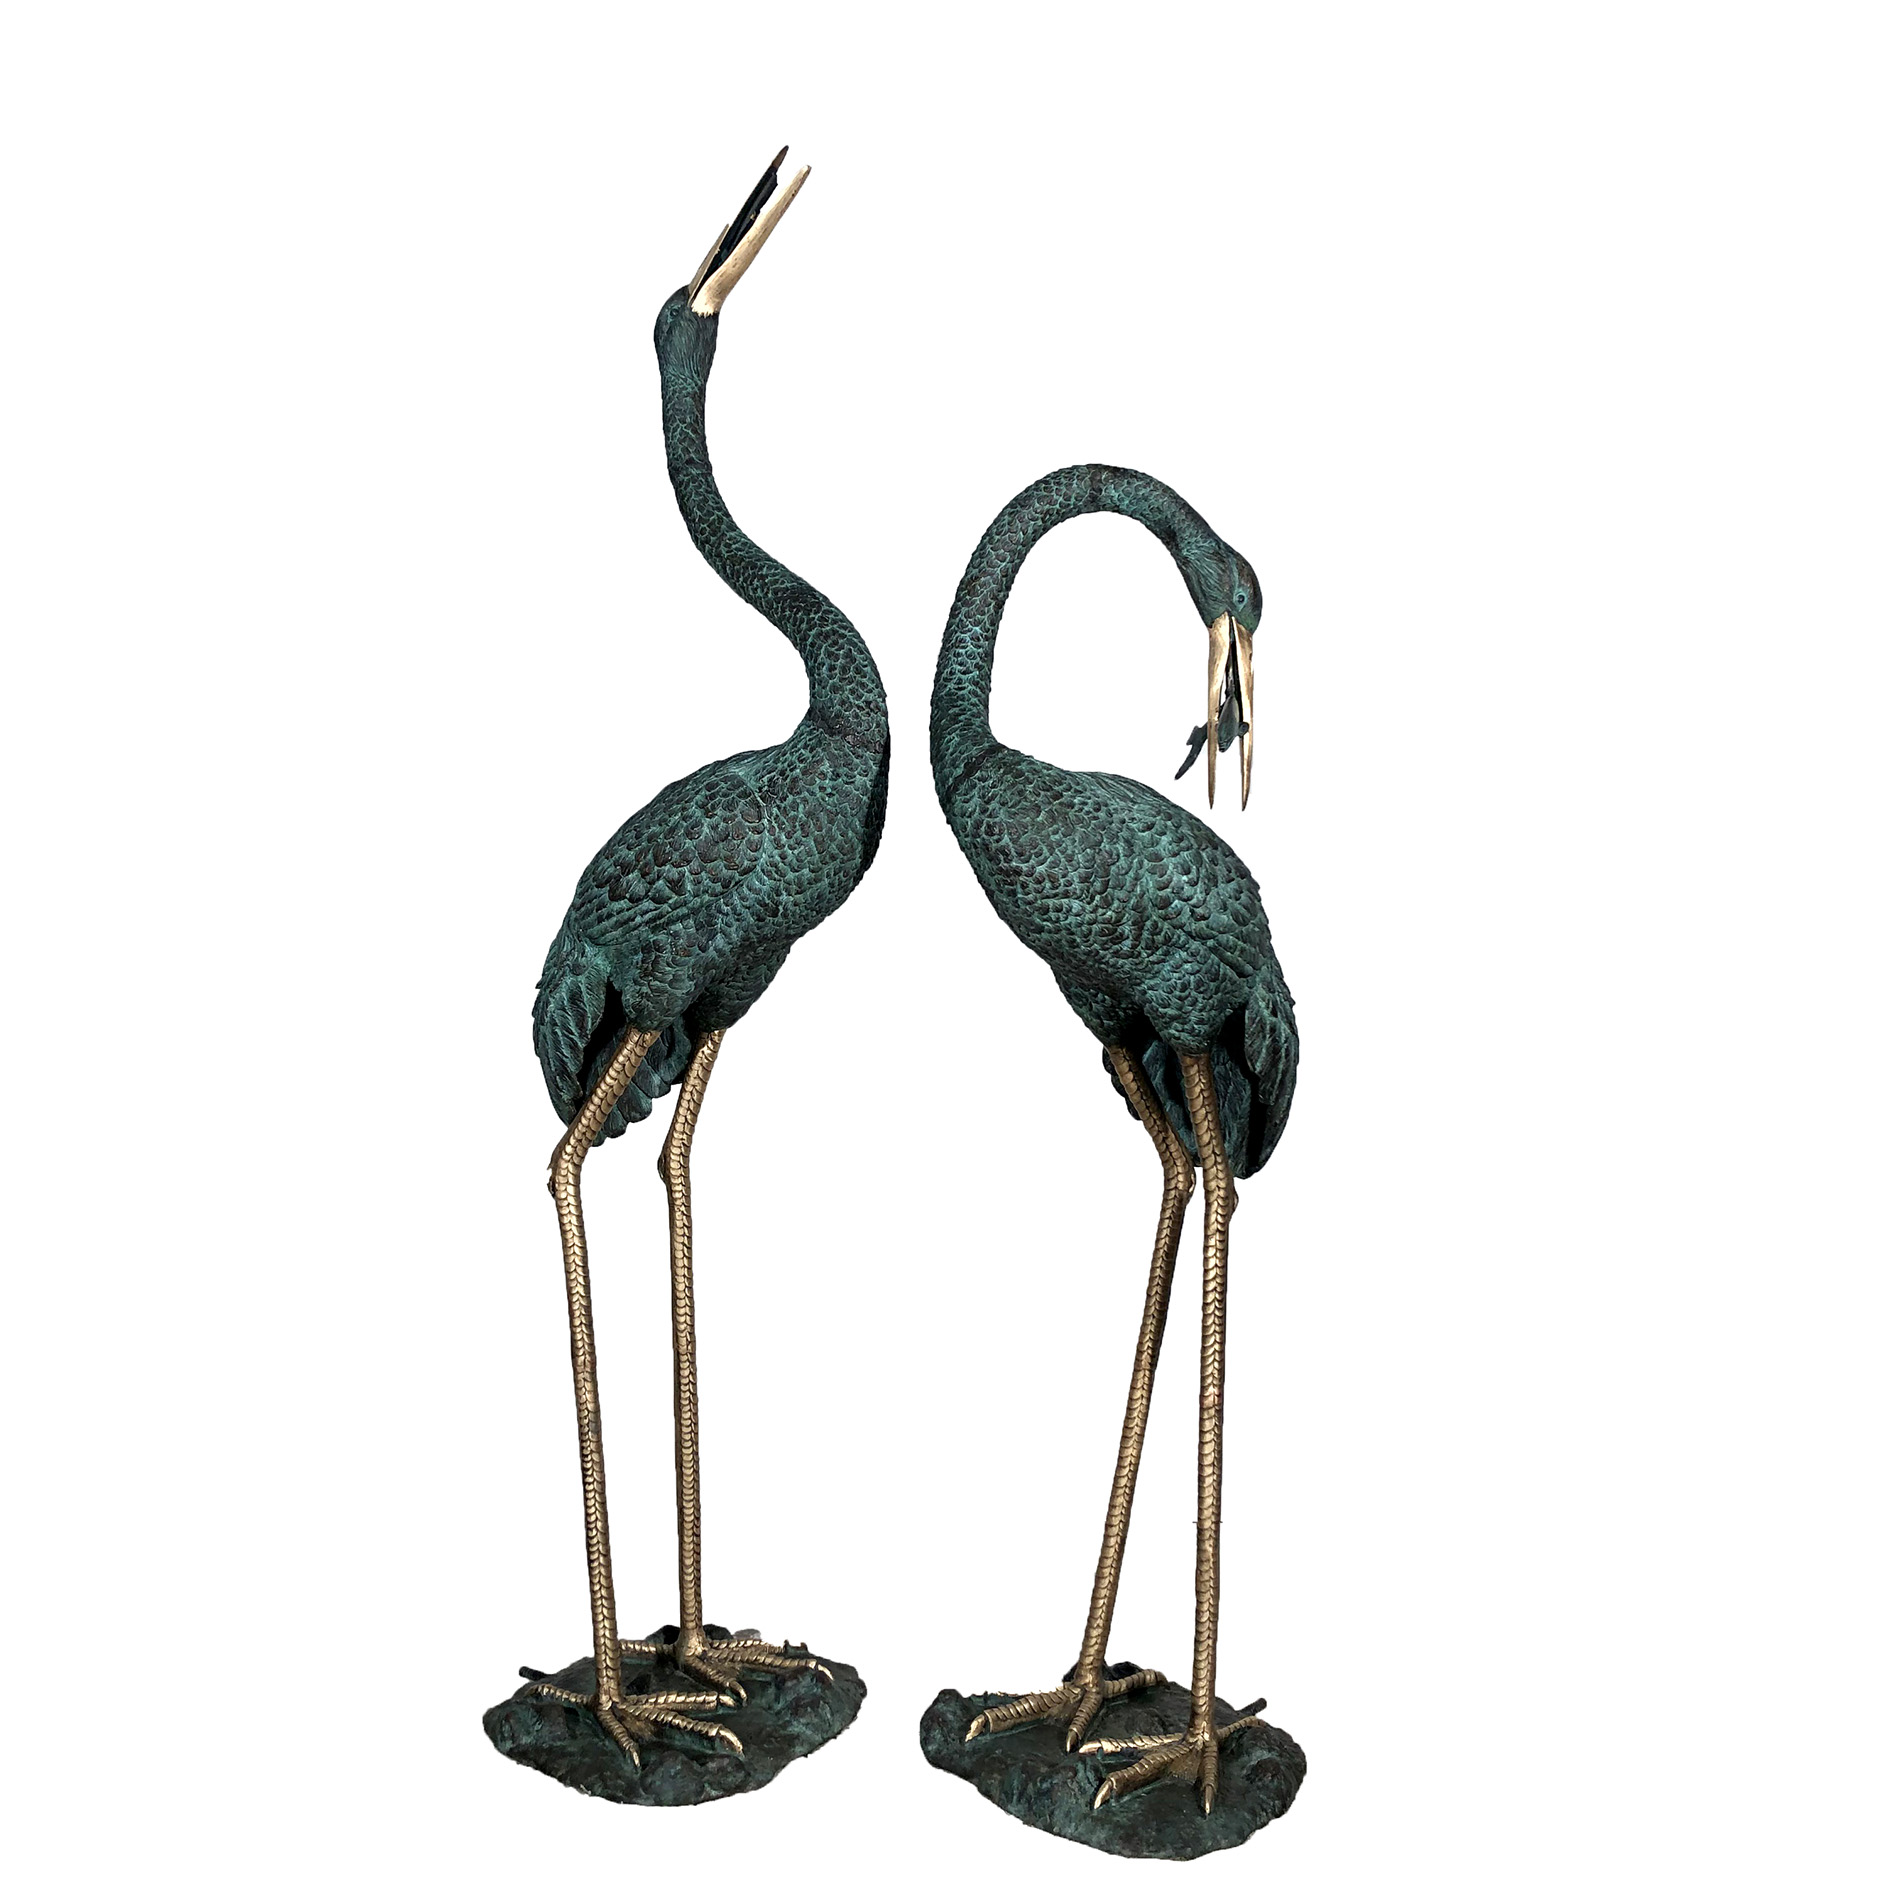 SRB45715-BH Bronze Crane Fountain Sculpture Set in Verdigris Patina with Polished Brass Accents by Metropolitan Galleries Inc